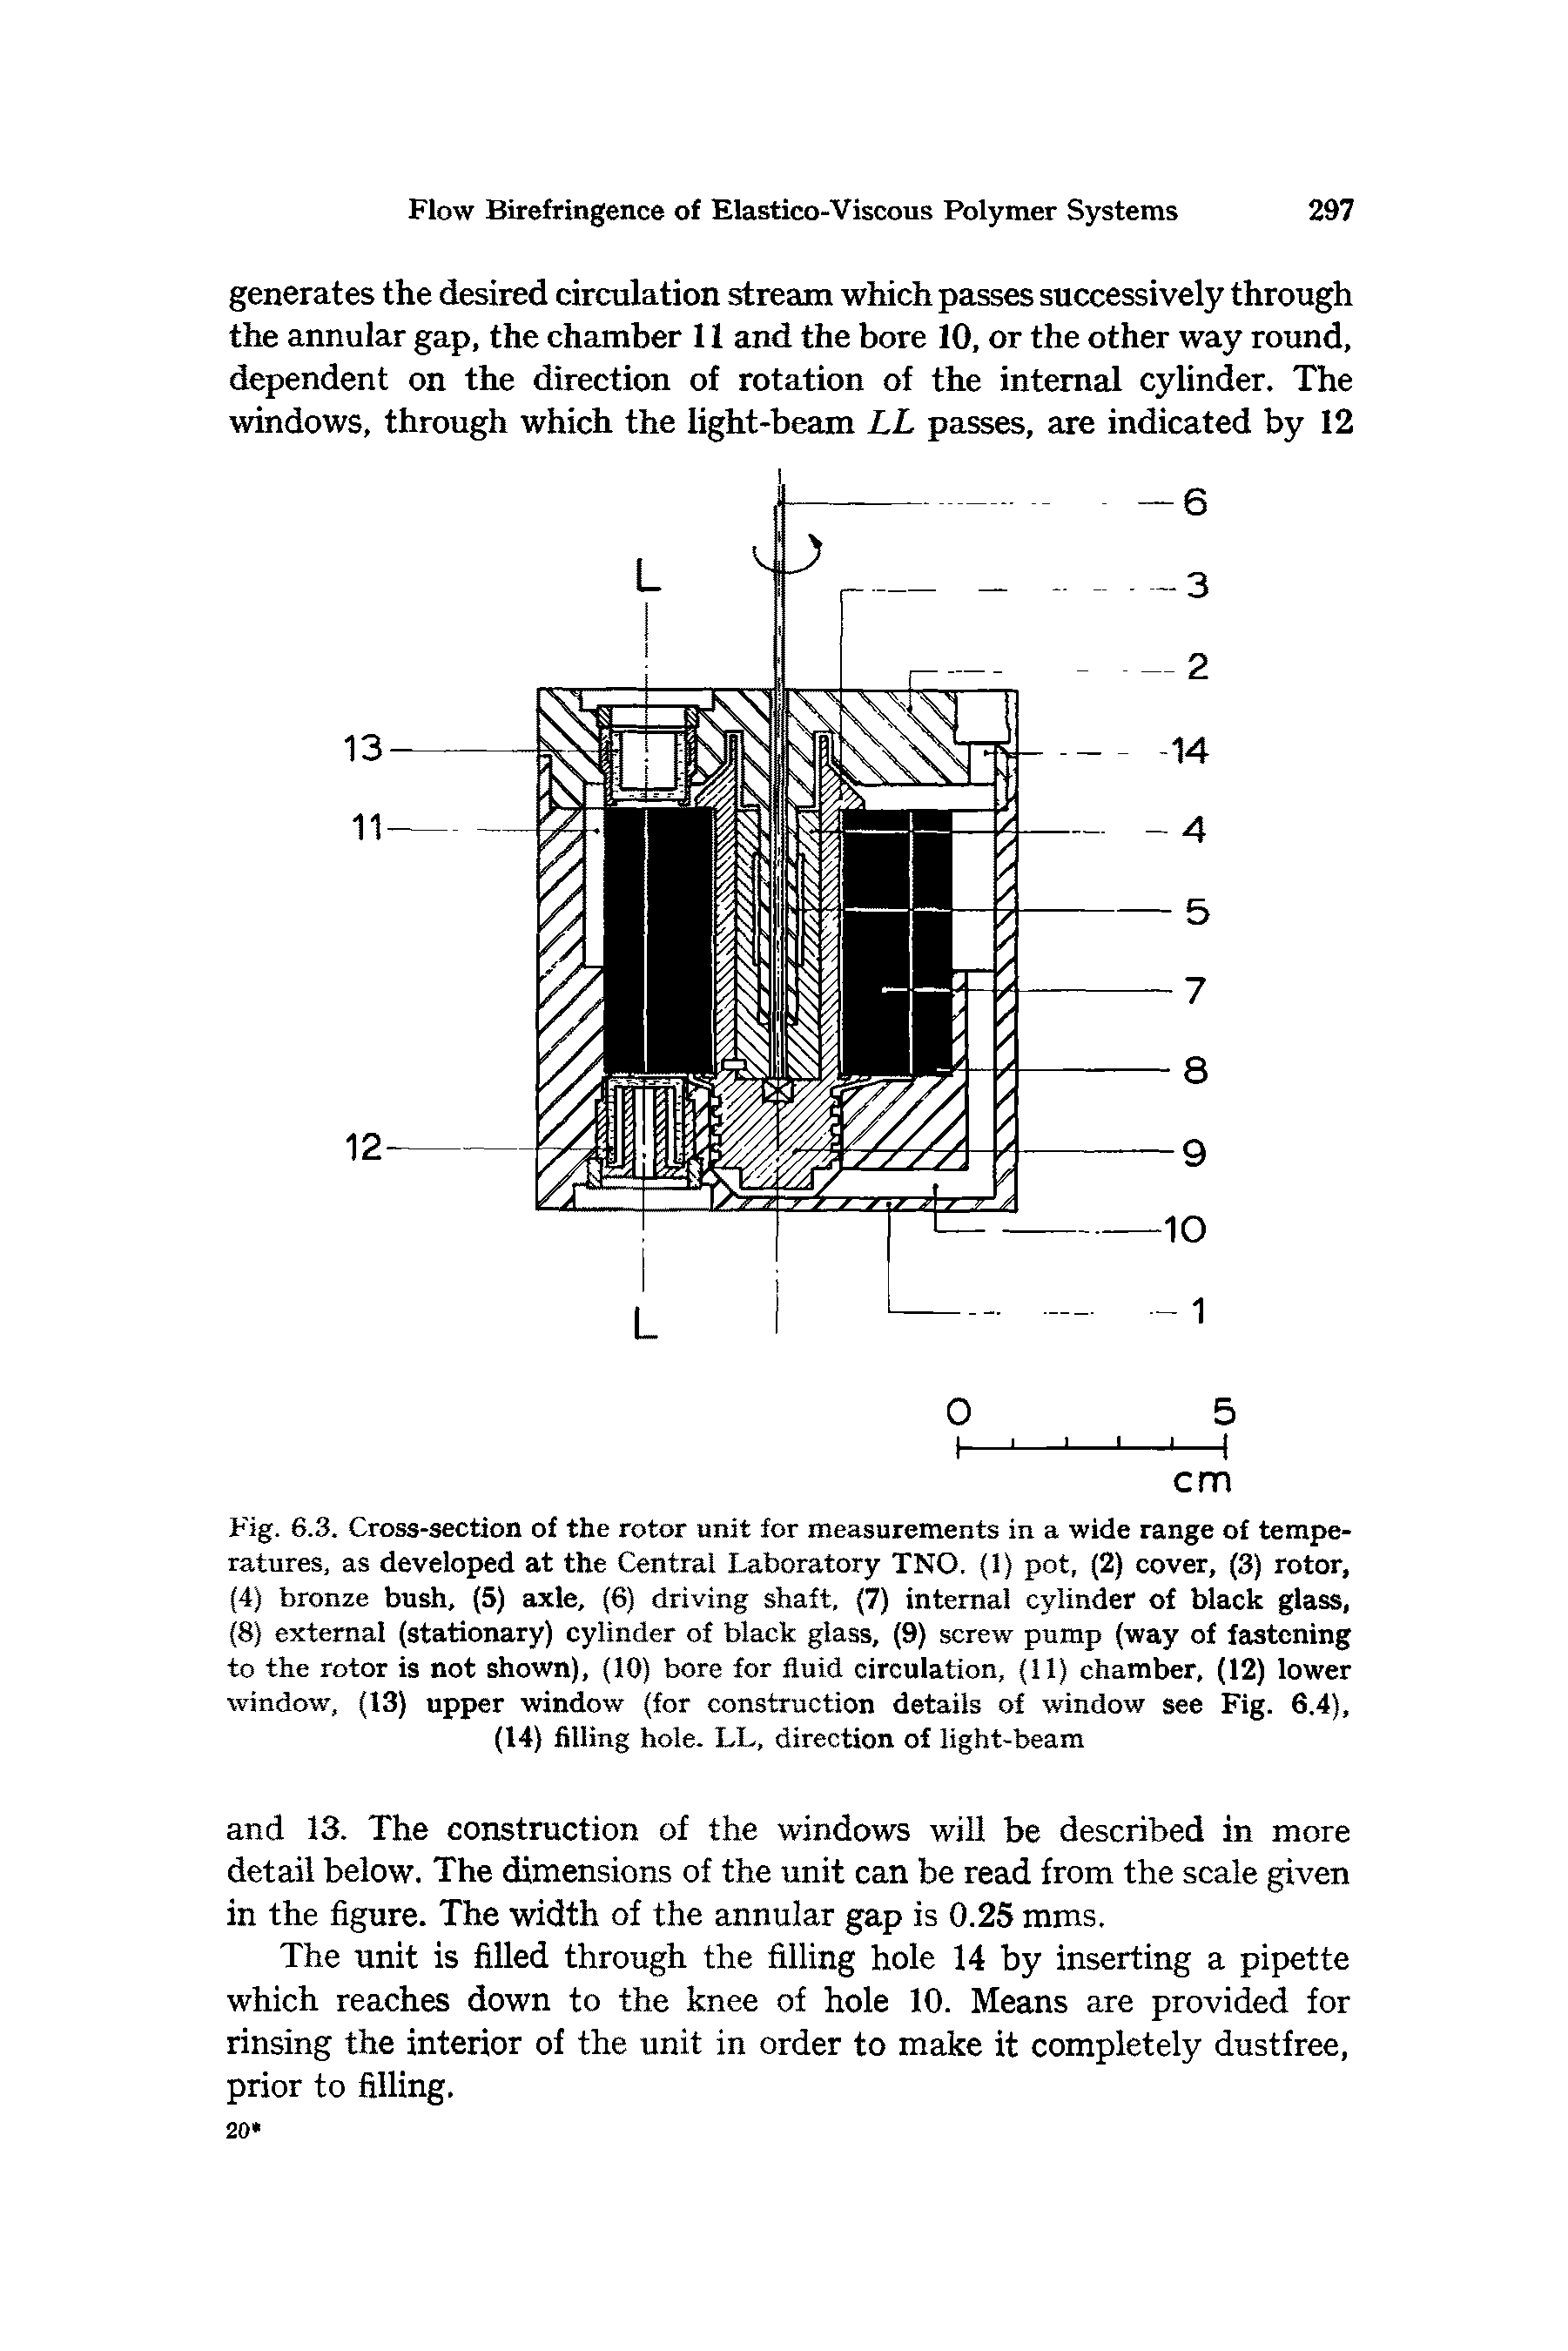 Fig. 6.3. Cross-section of the rotor unit for measurements in a wide range of temperatures, as developed at the Central Laboratory TNO. (1) pot, (2) cover, (3) rotor, (4) bronze bush, (5) axle, (6) driving shaft, (7) internal cylinder of black glass, (8) external (stationary) cylinder of black glass, (9) screw pump (way of fastening to the rotor is not shown), (10) bore for fluid circulation, (11) chamber, (12) lower window, (13) upper window (for construction details of window see Fig. 6.4), (14) filling hole. LL, direction of light-beam...